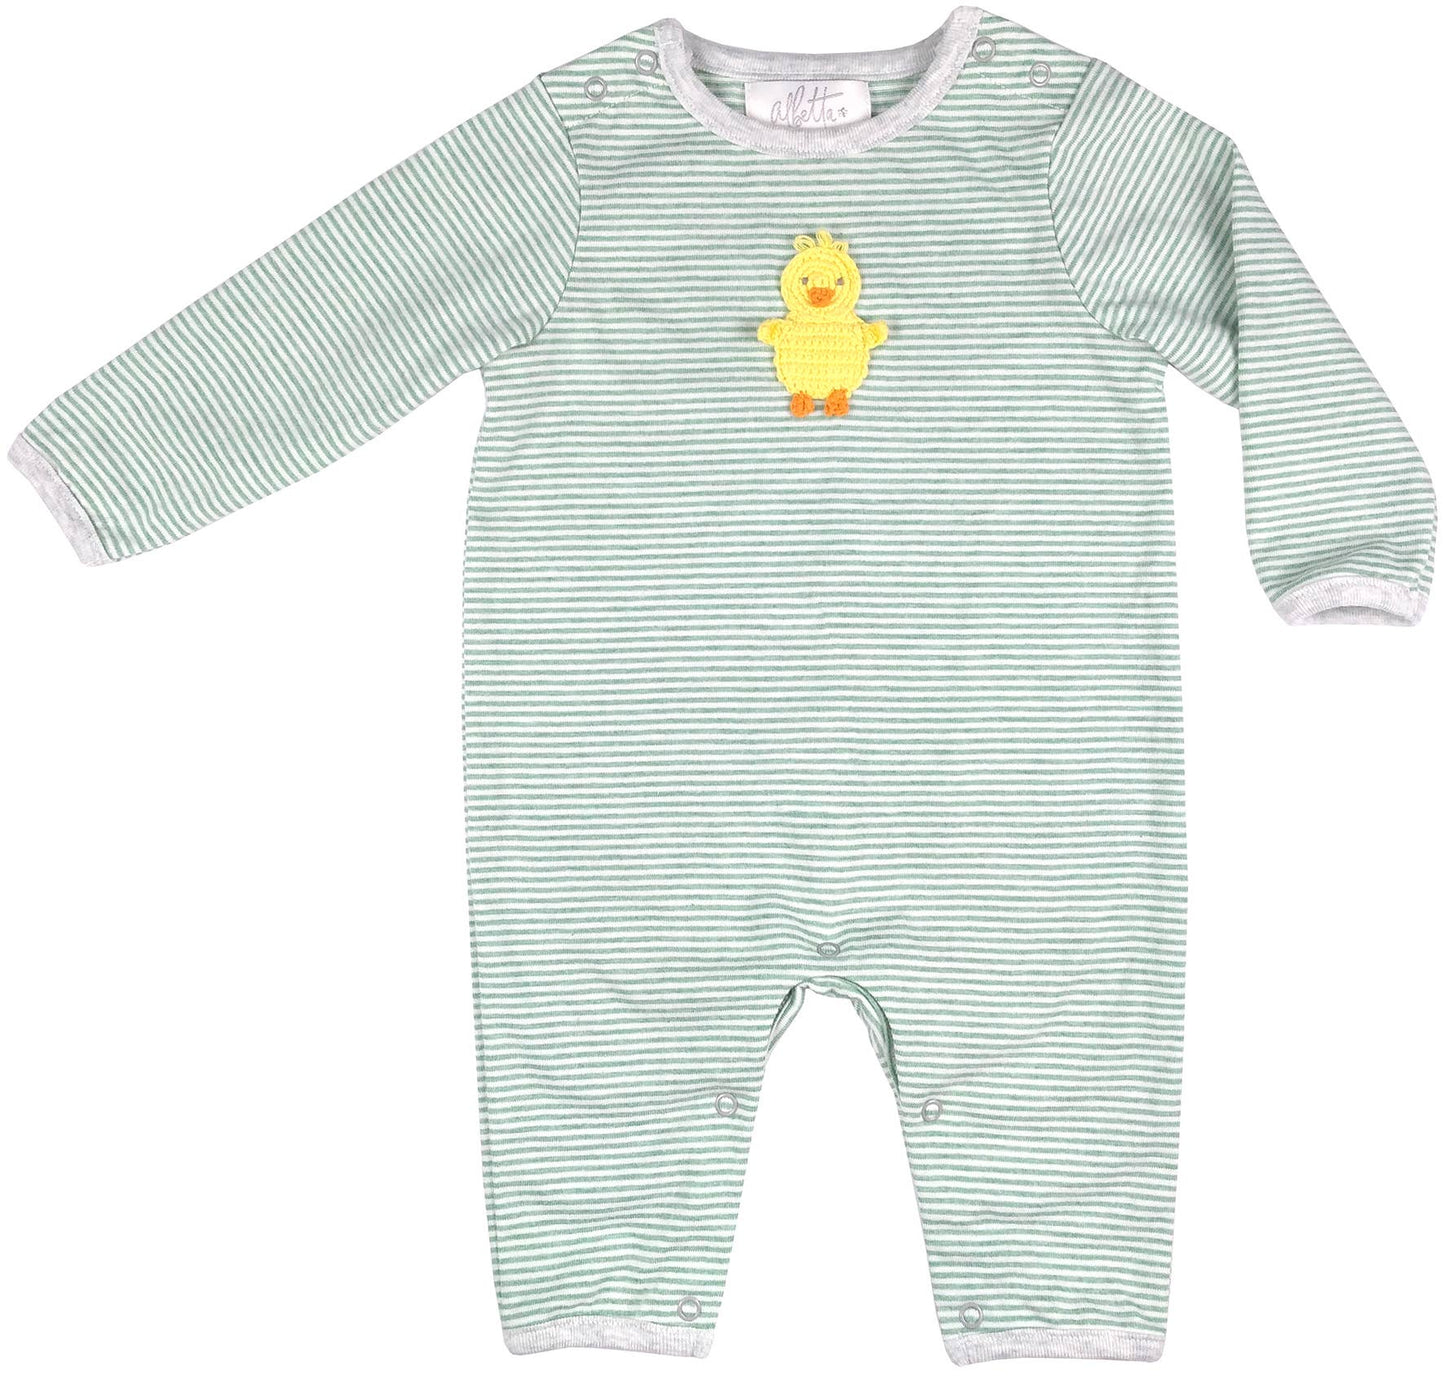 Baby Chick Playsuit Romper